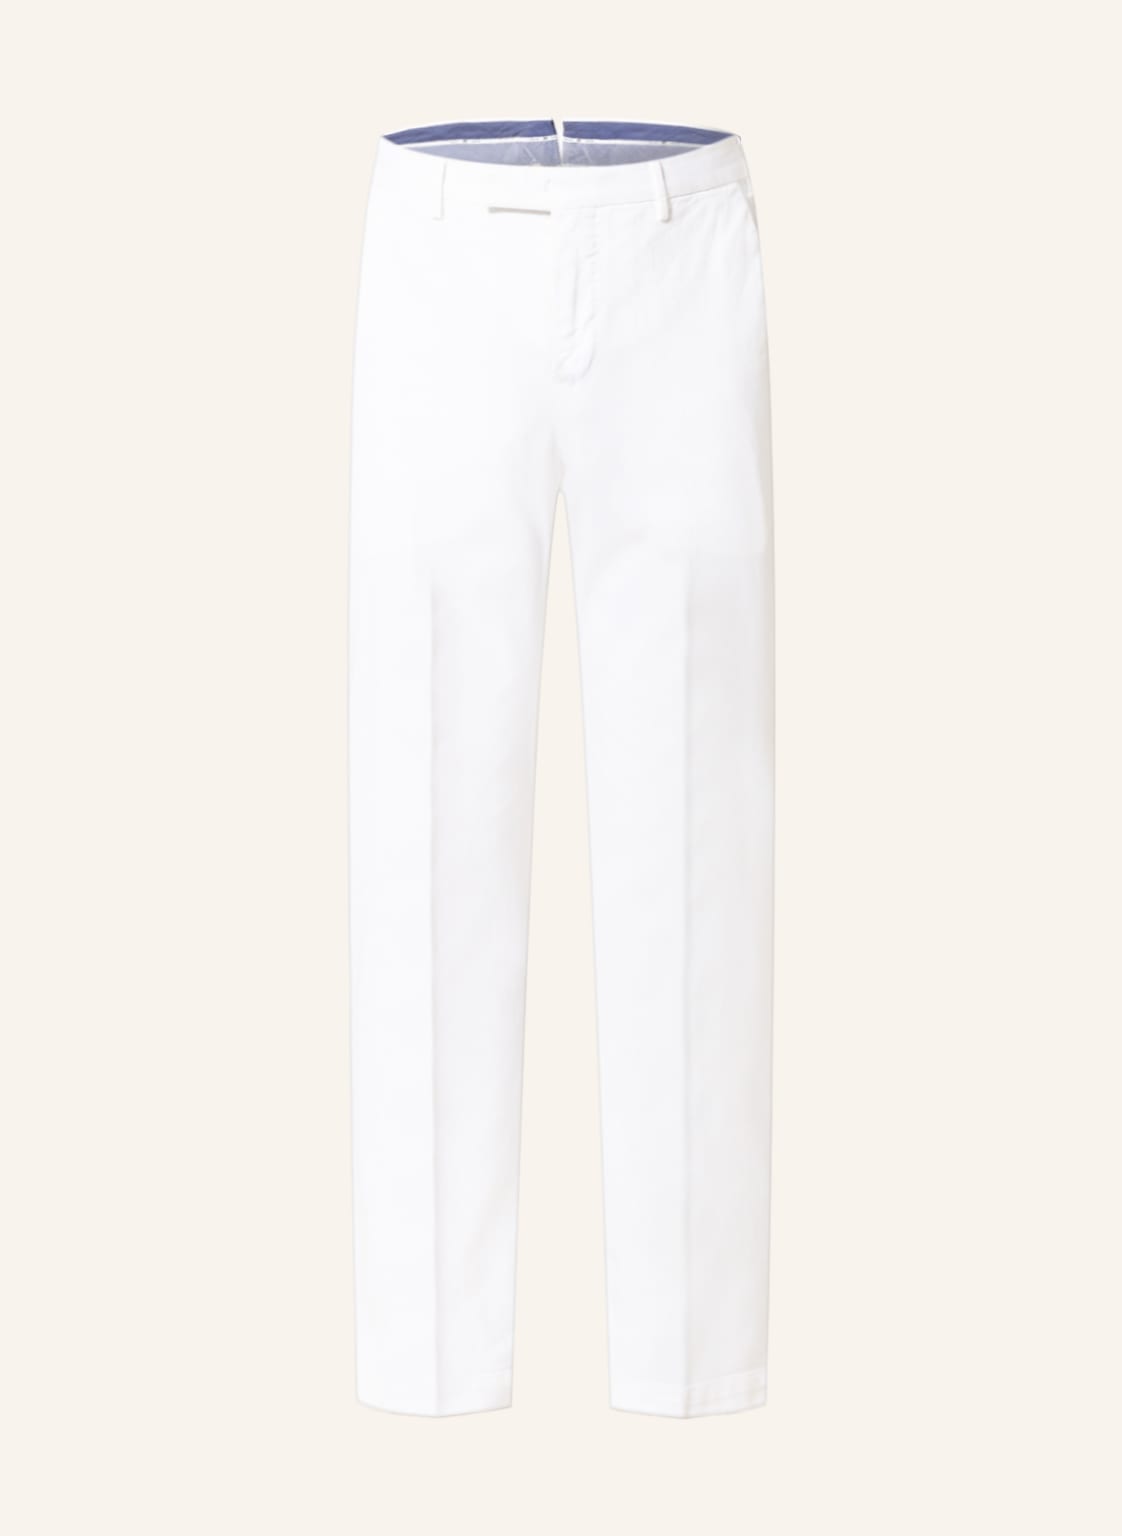 Image of Pt Torino Chino Master Fit weiss